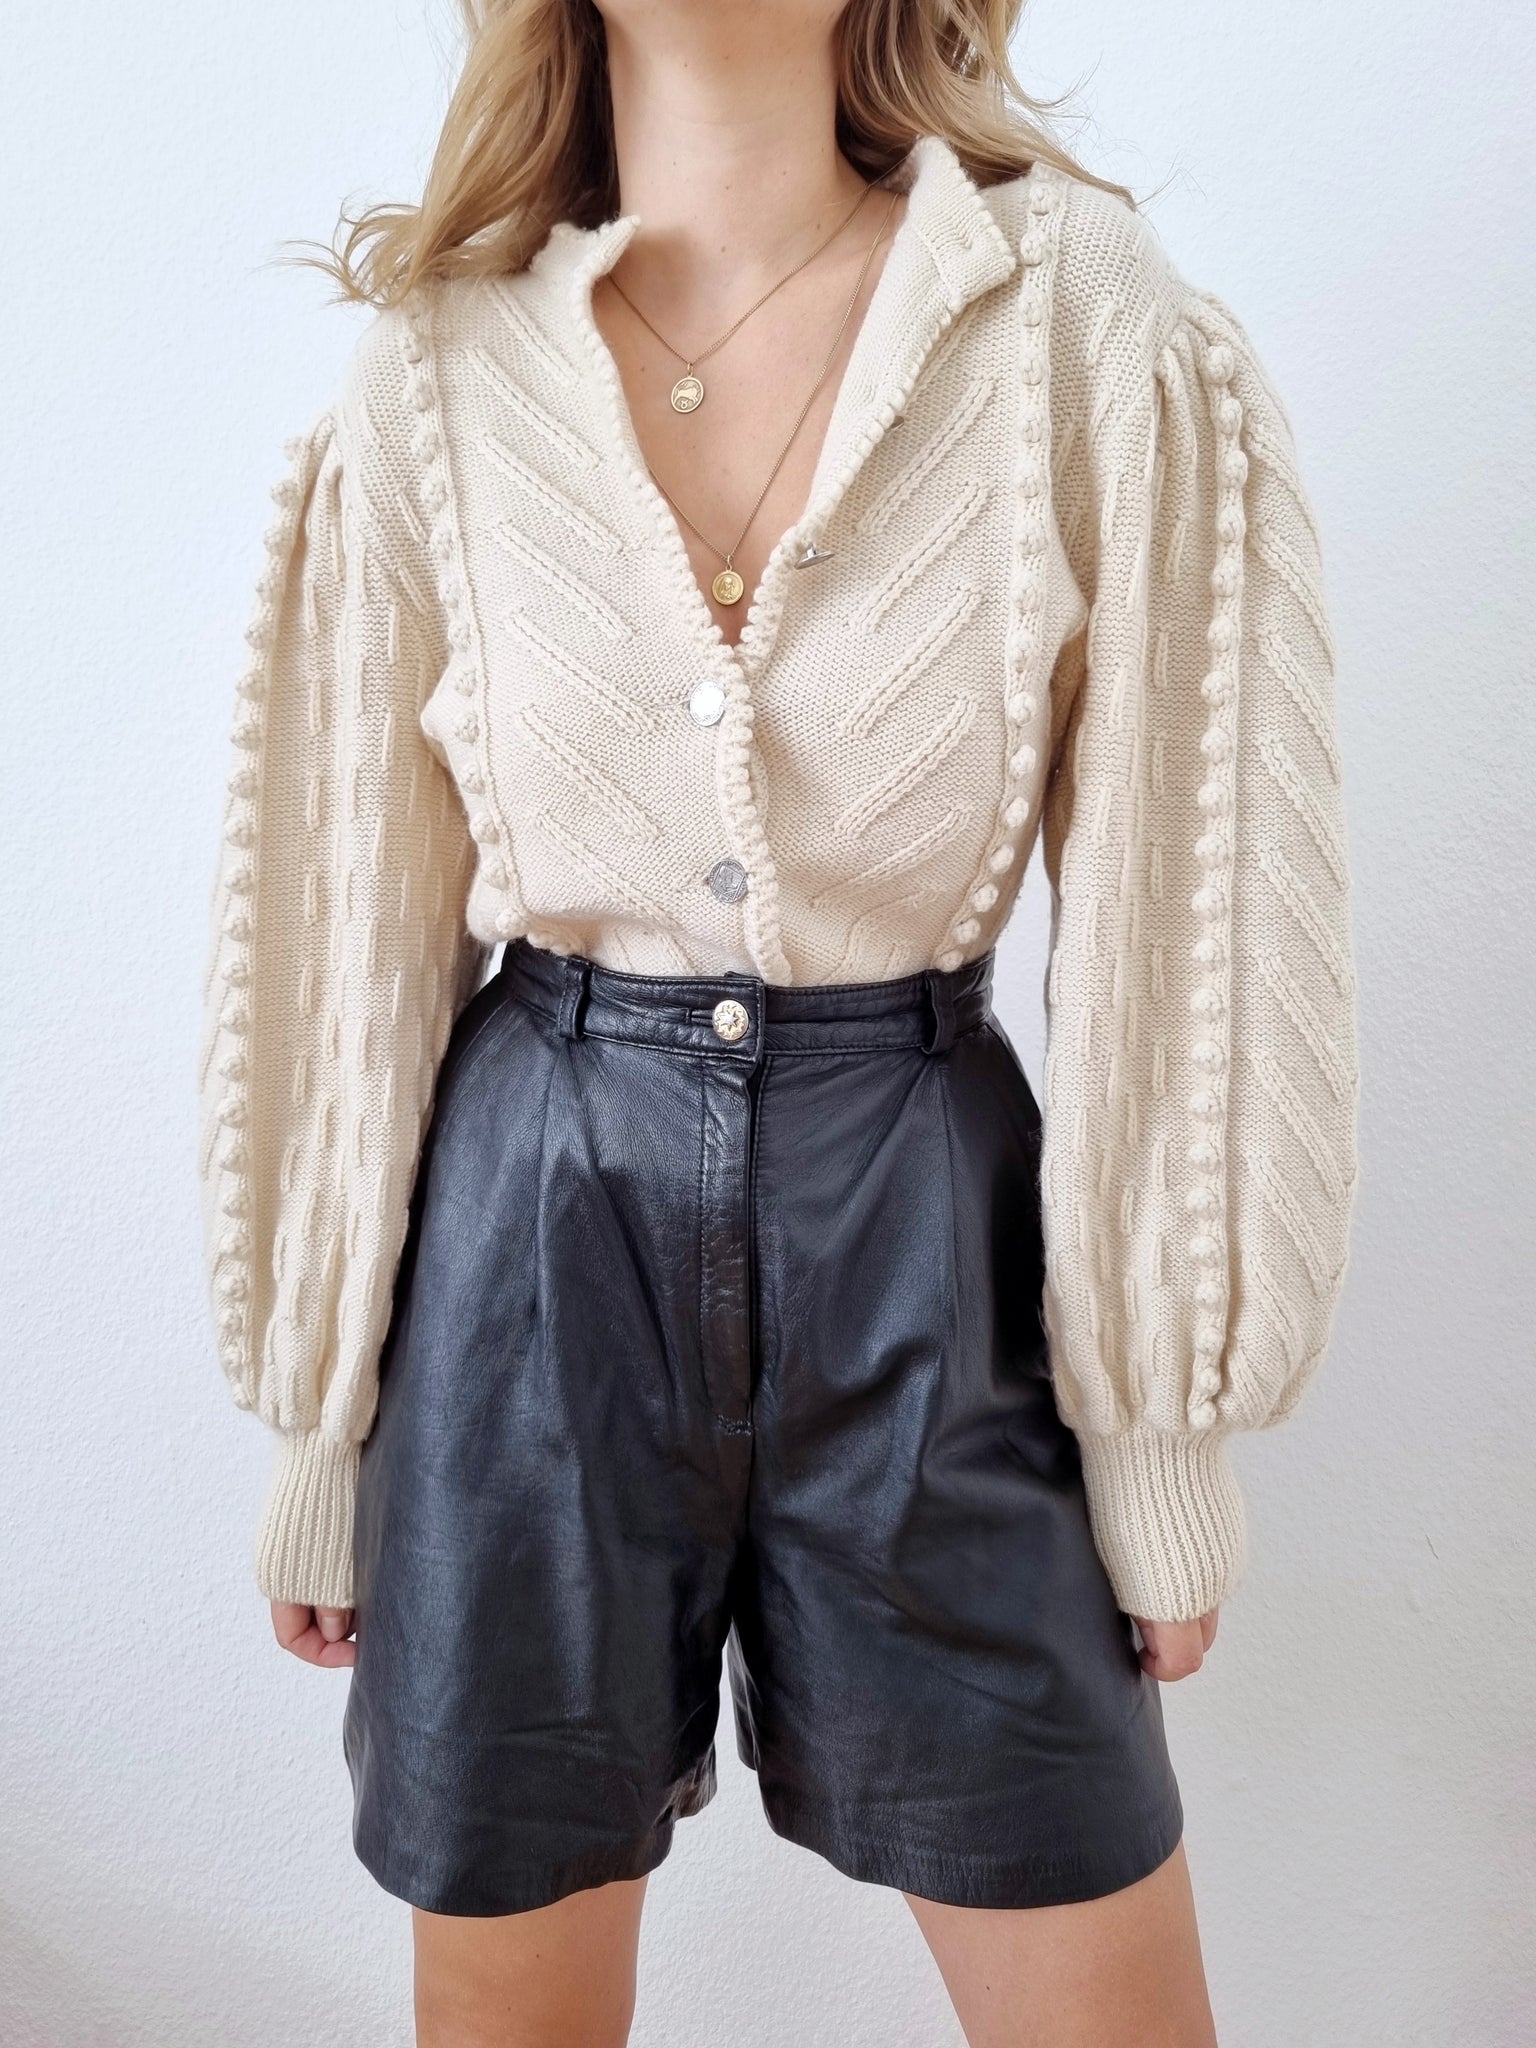 Vintage Nappa High Waisted Leather Pants *buttery soft